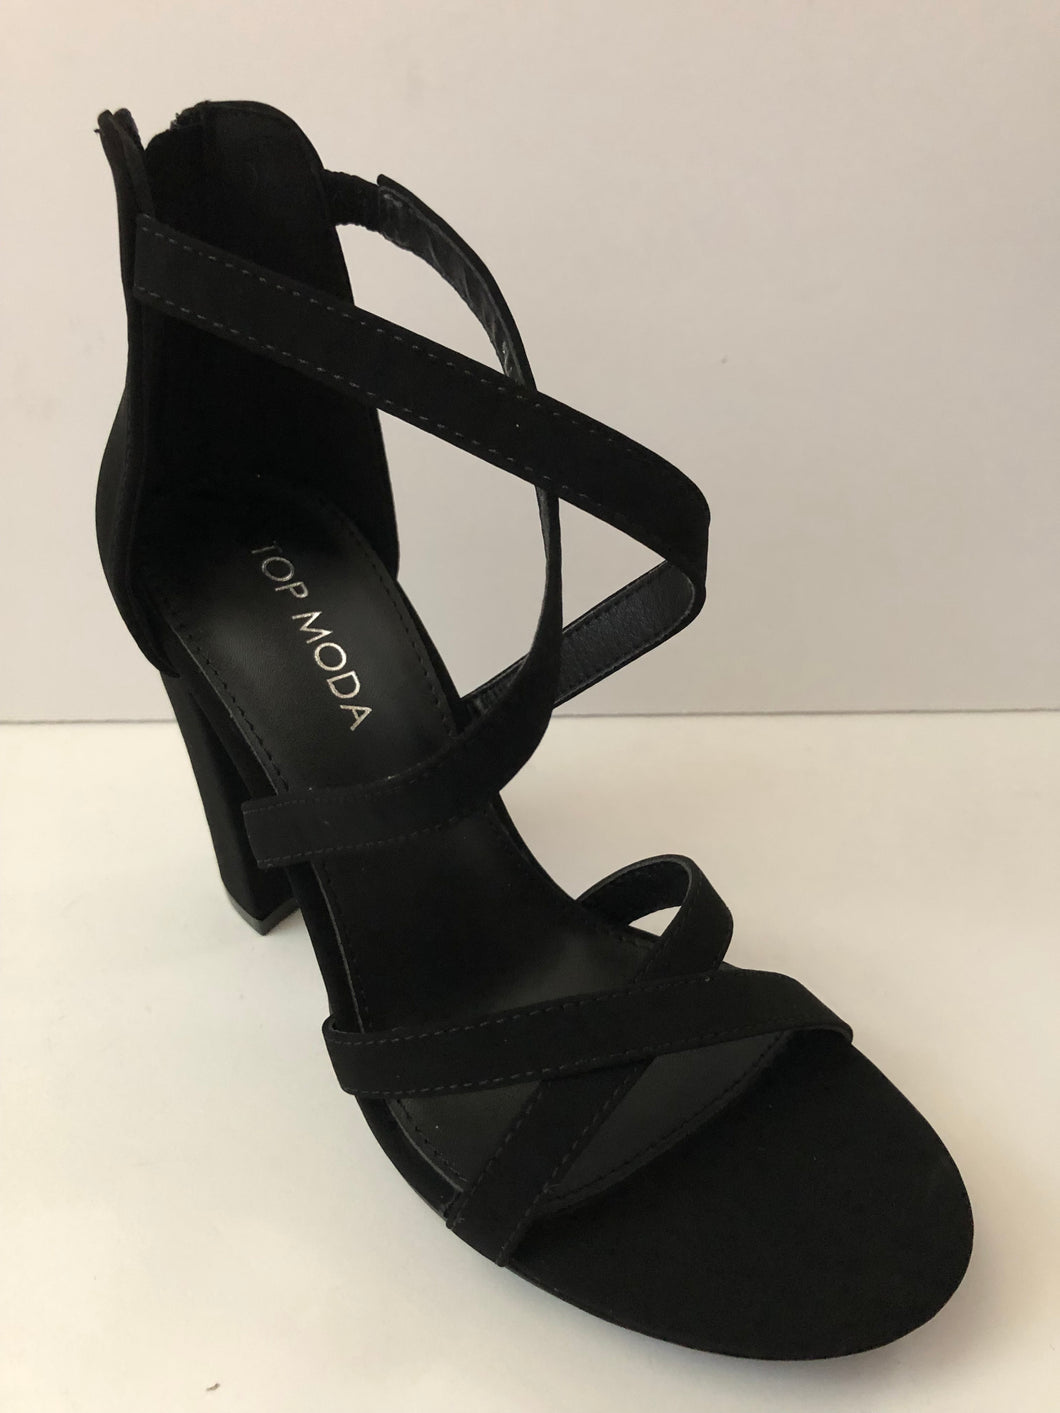 Black Crisscross Strap Sandal High Heels. Party shoes high heels. Sandal high heels with decorative crisscross straps in black. Chunky heel. Secure fit with zipper closed heel backing. Open toe sandal heel. Good for parties and fancy events.